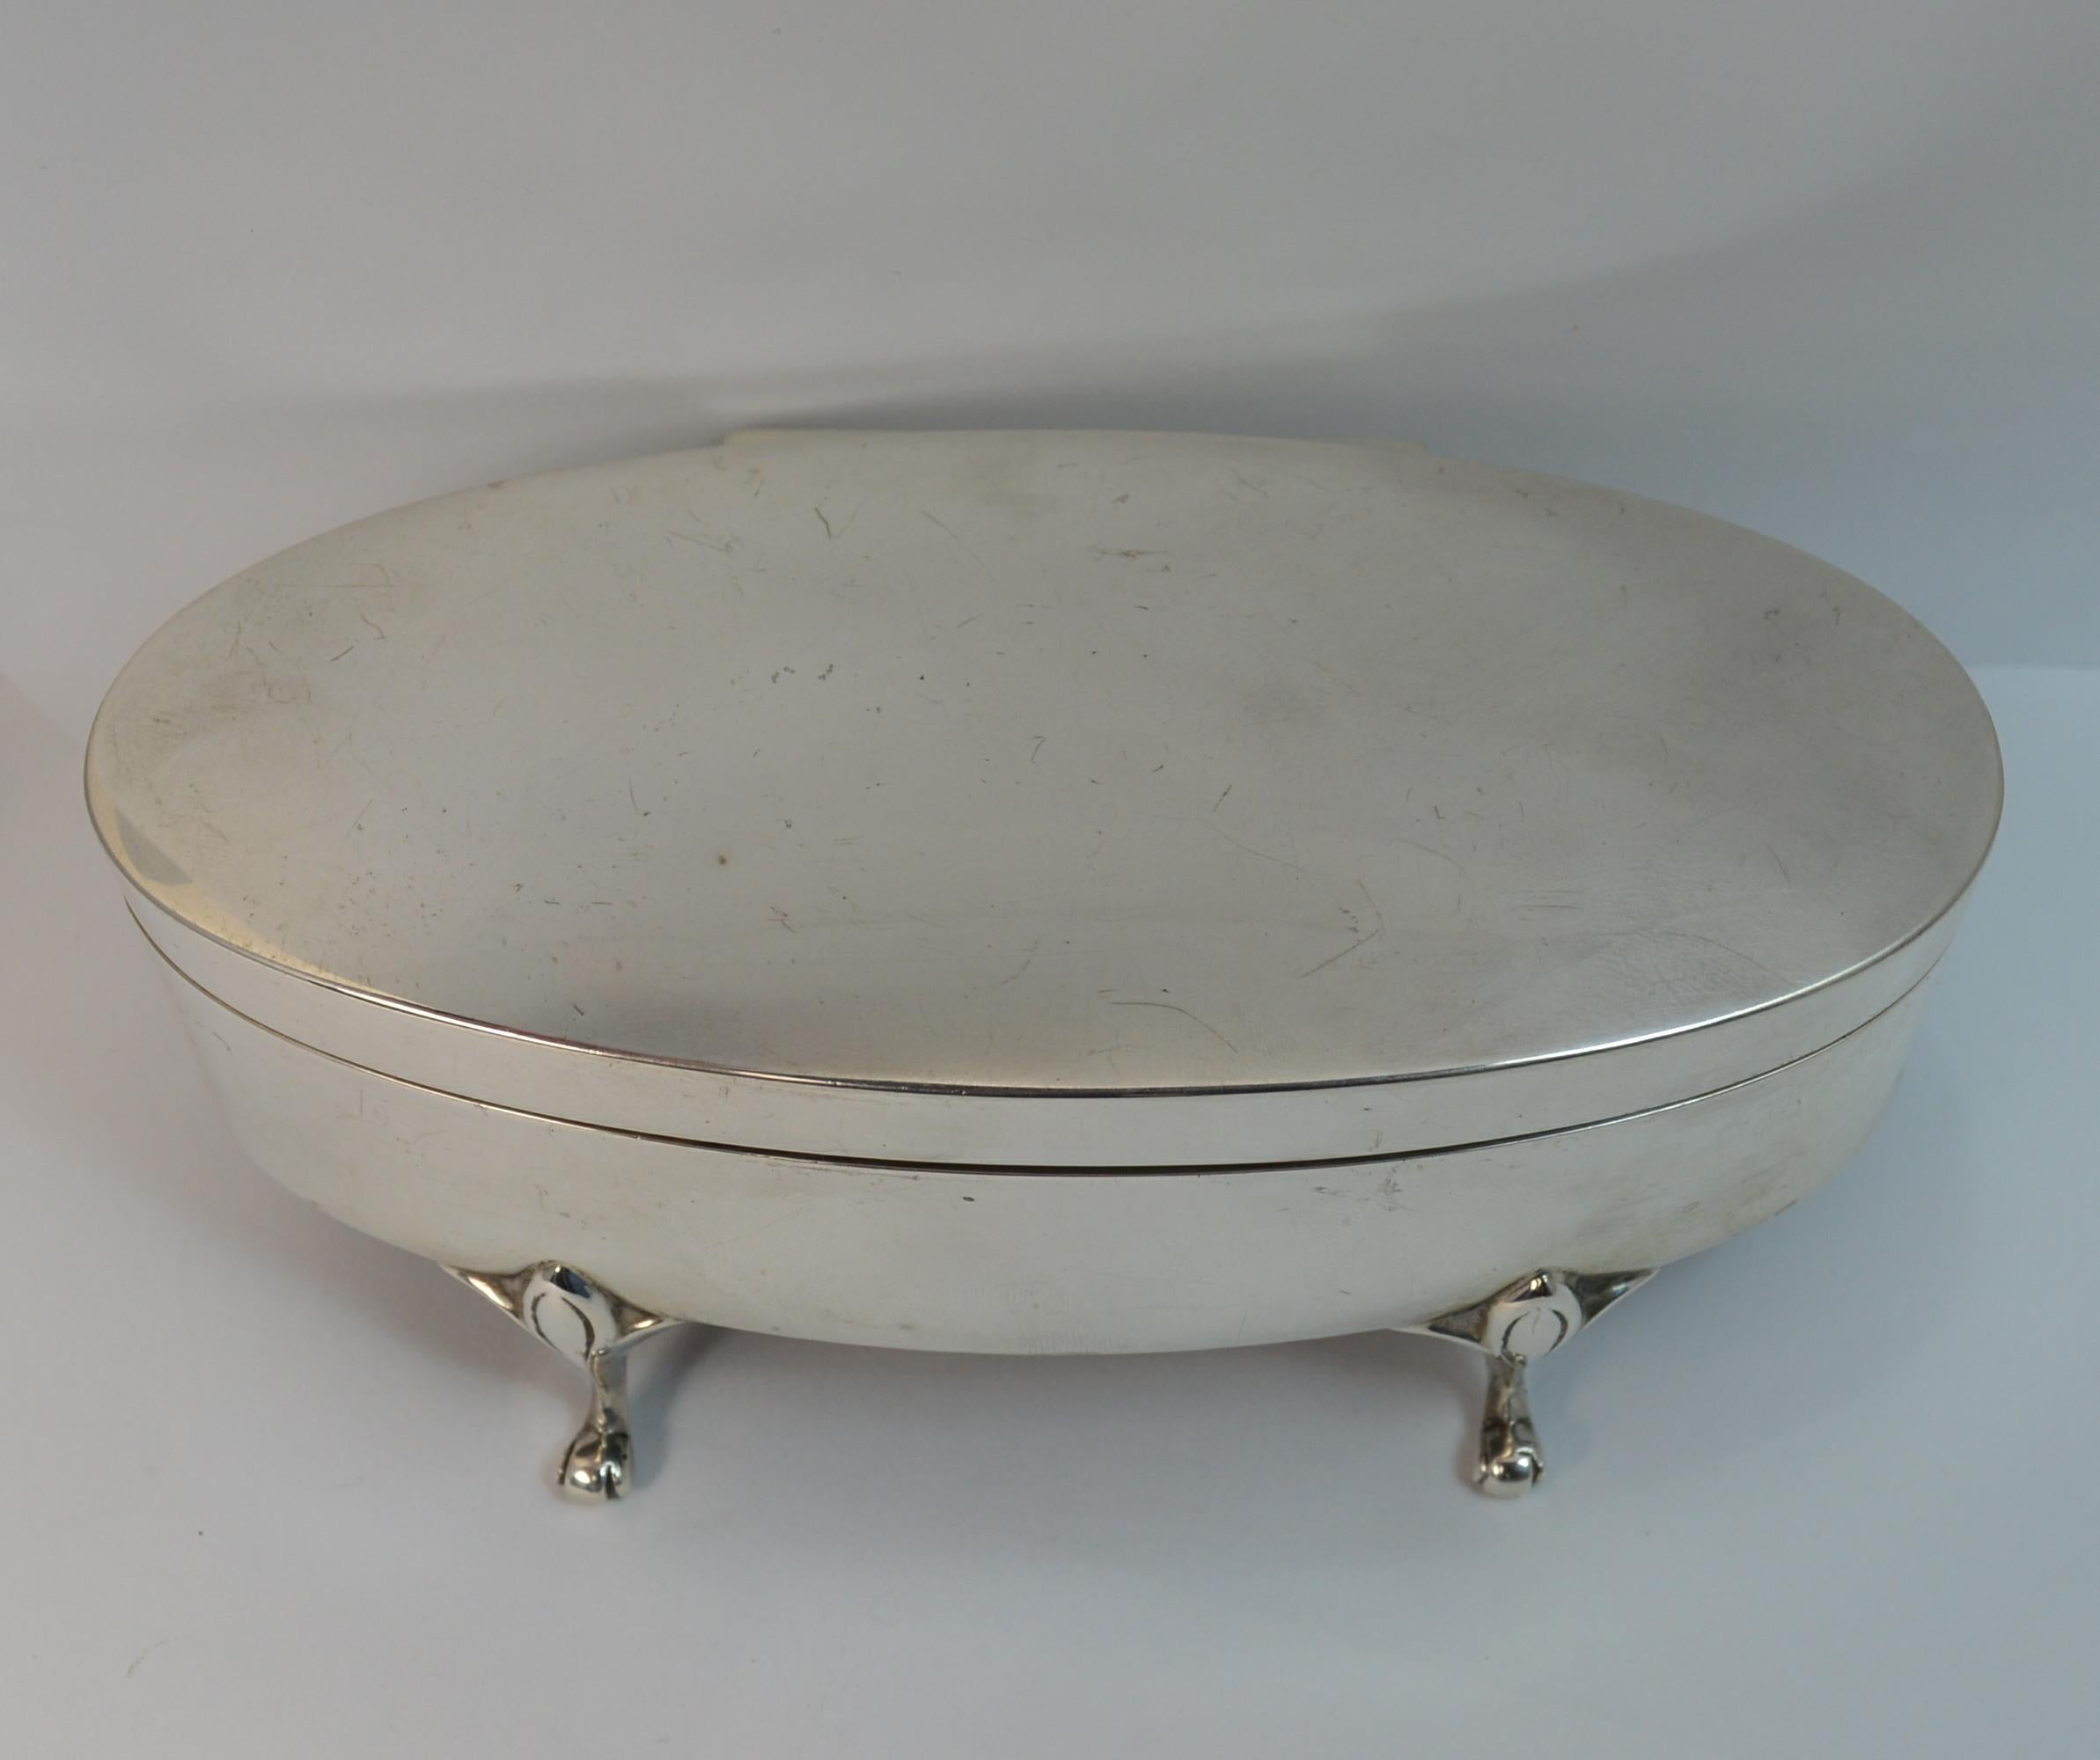 A beautiful English made solid silver jewellery box.
Stylish shaped piece with original insides.
Fine plain finish throughout with attractive four feet to base.

Hallmarks ; full hallmarks to side of rim.
Weight ; 288 grams, weighted
Size ; 14cm x